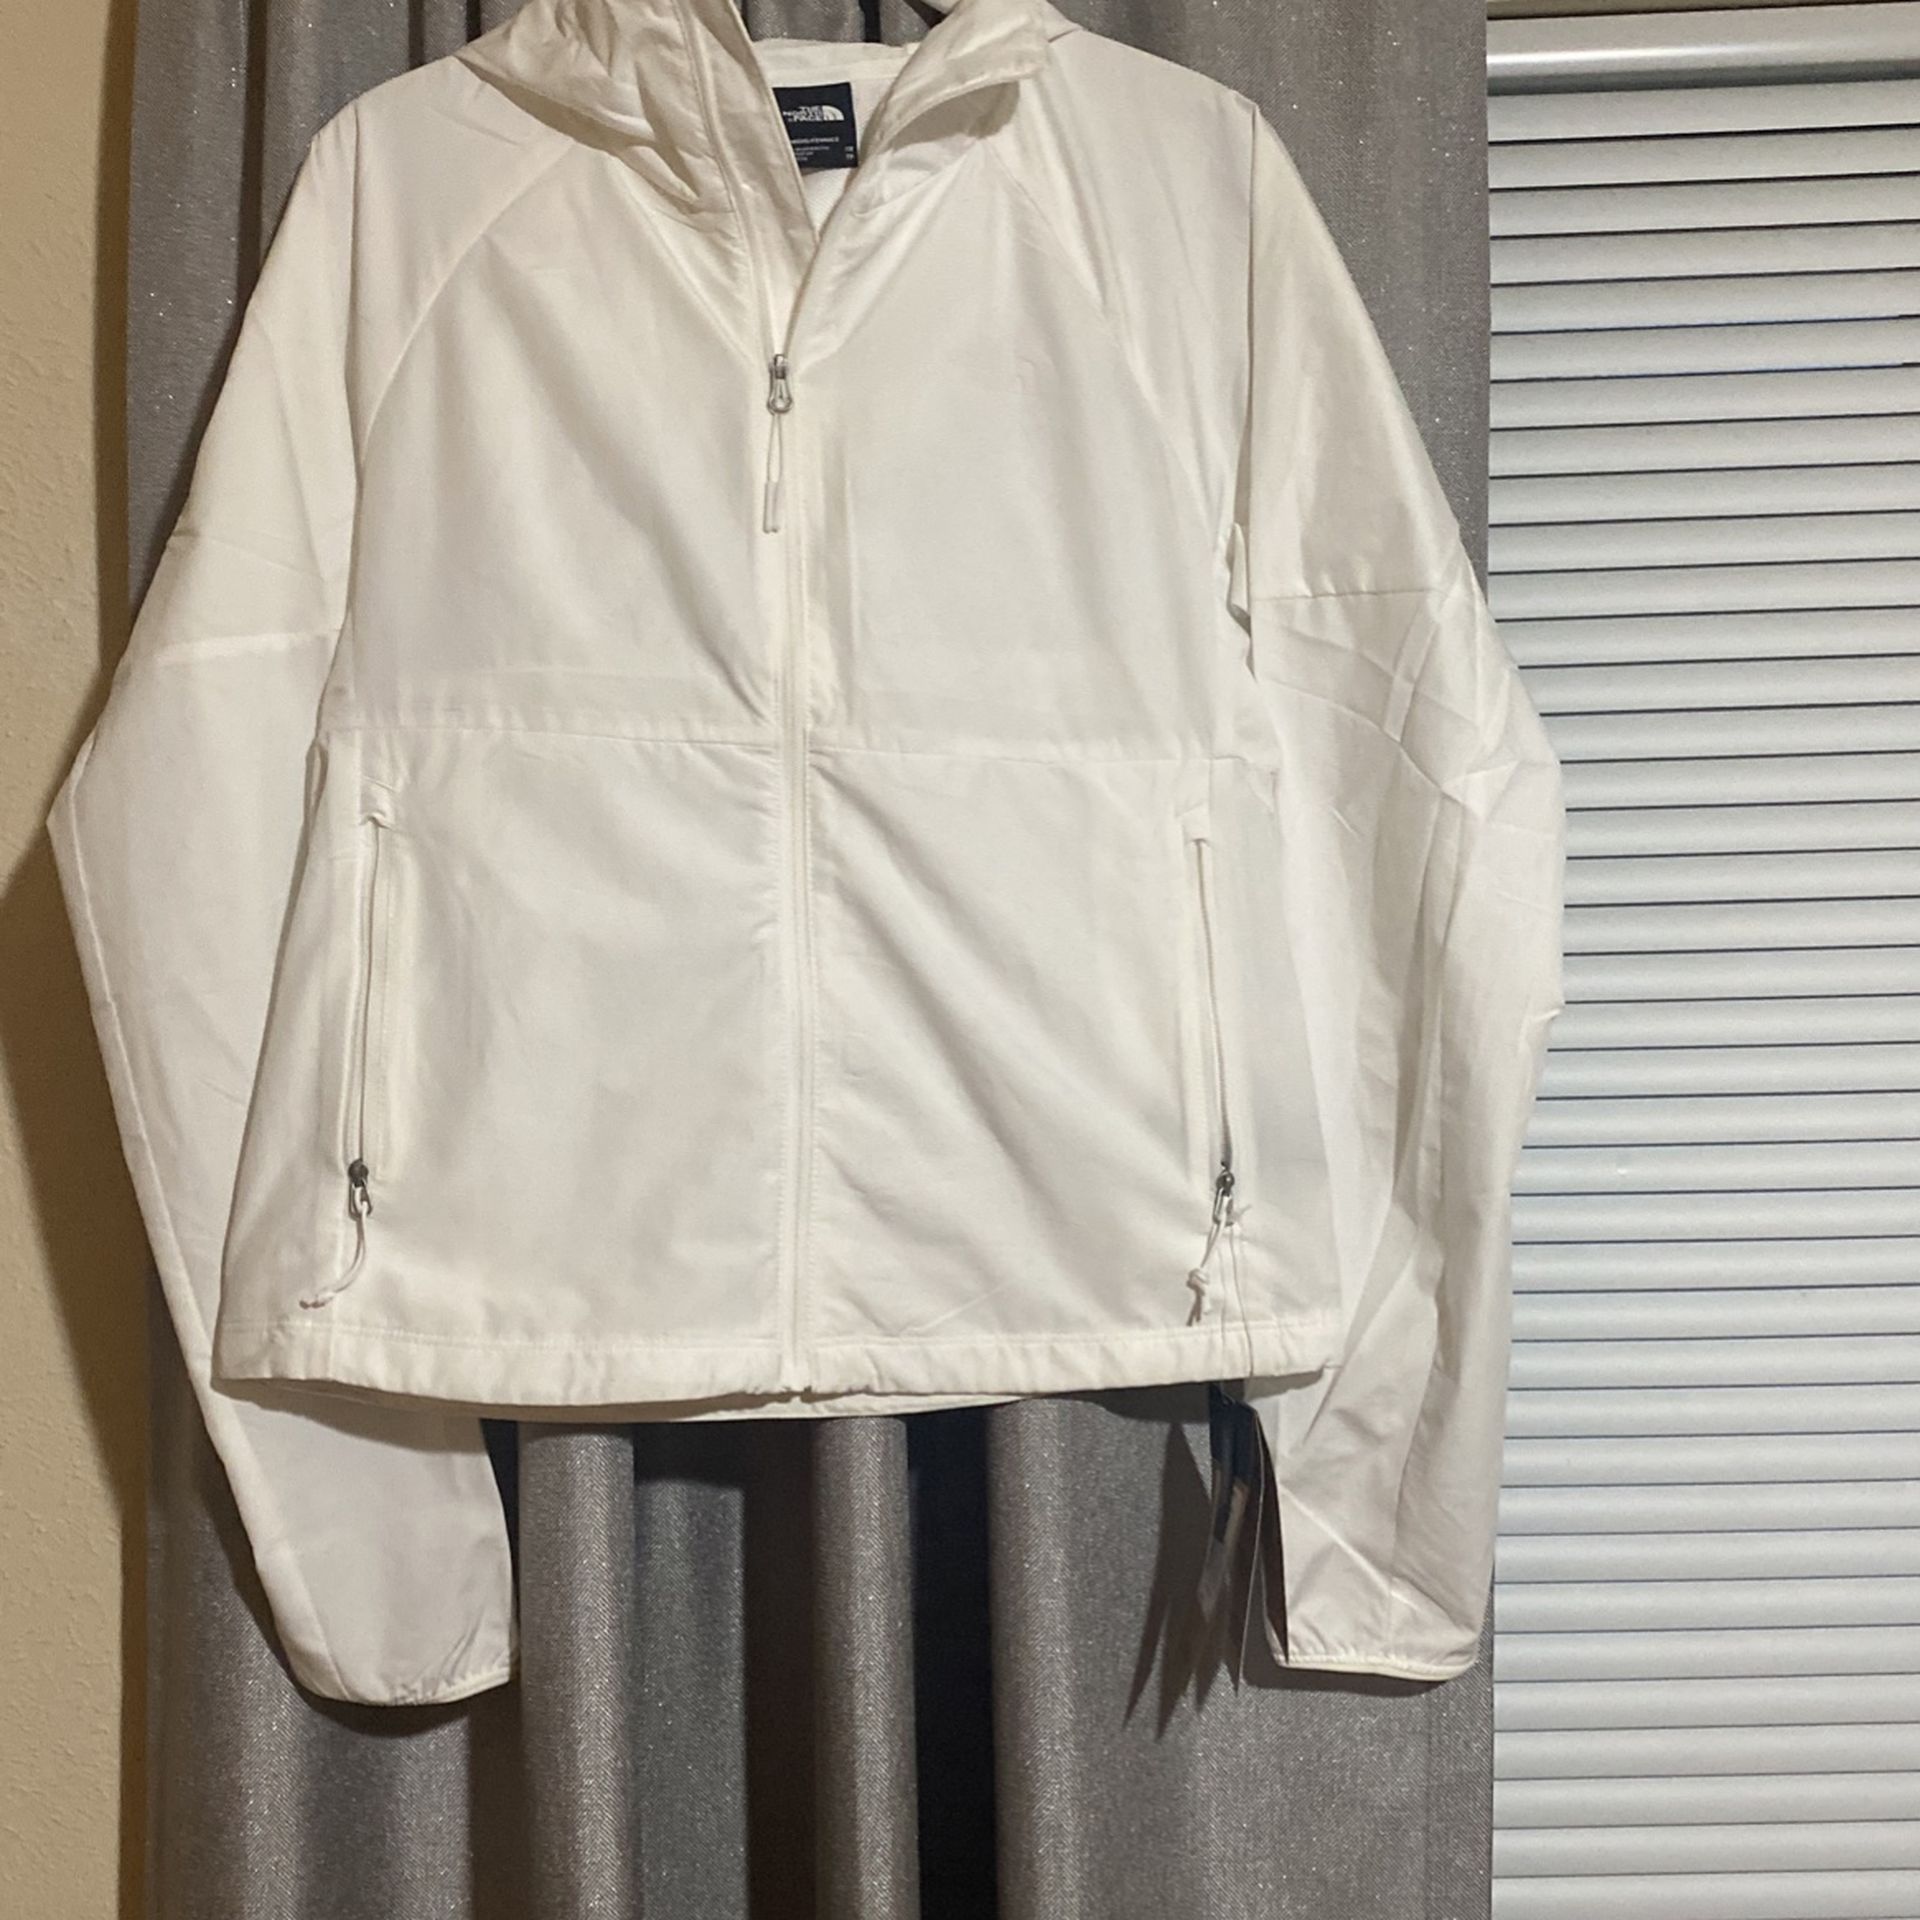 XS North Face Jacket $30 New 